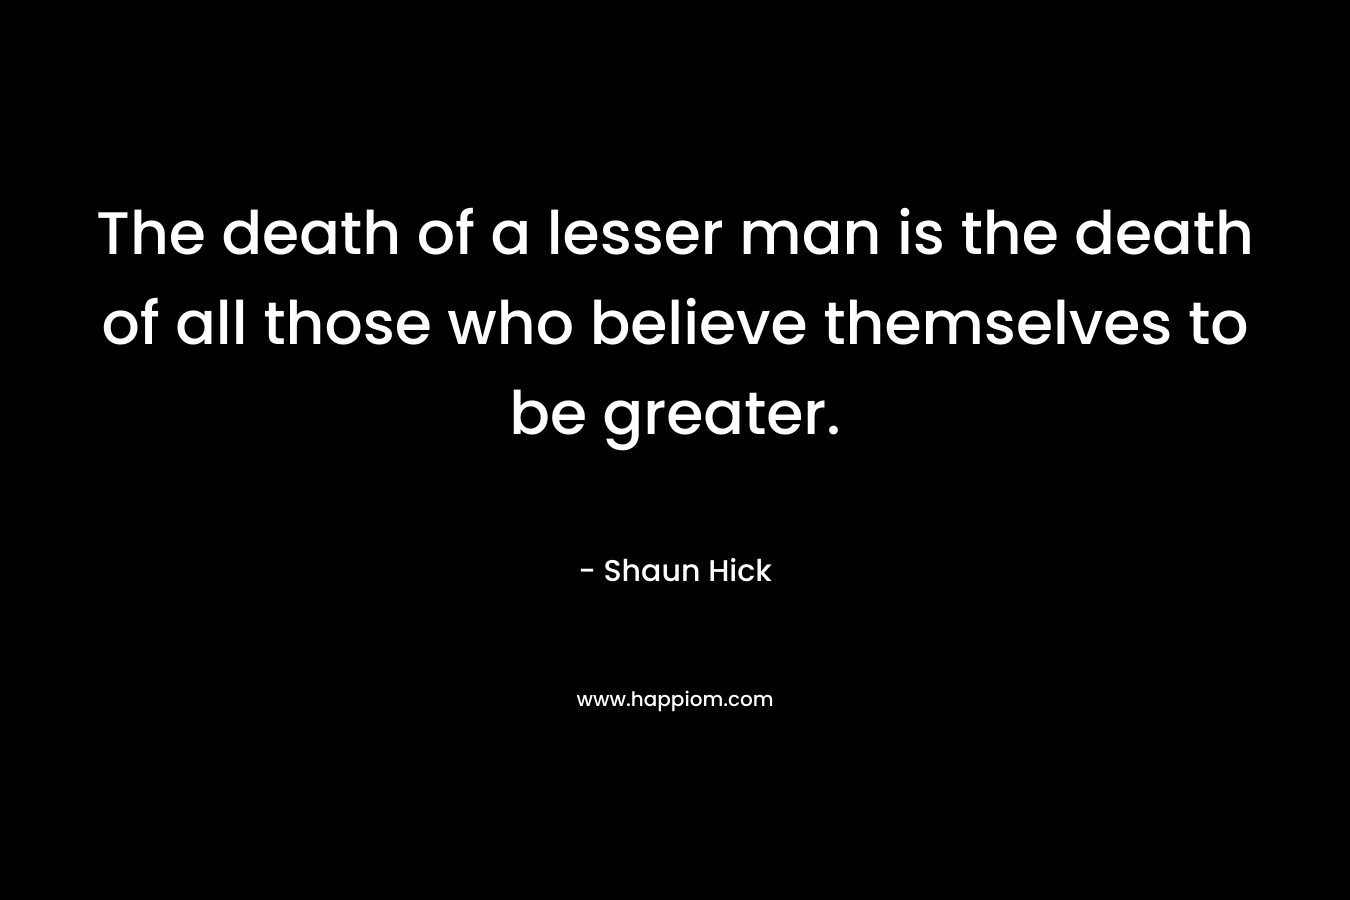 The death of a lesser man is the death of all those who believe themselves to be greater. – Shaun Hick